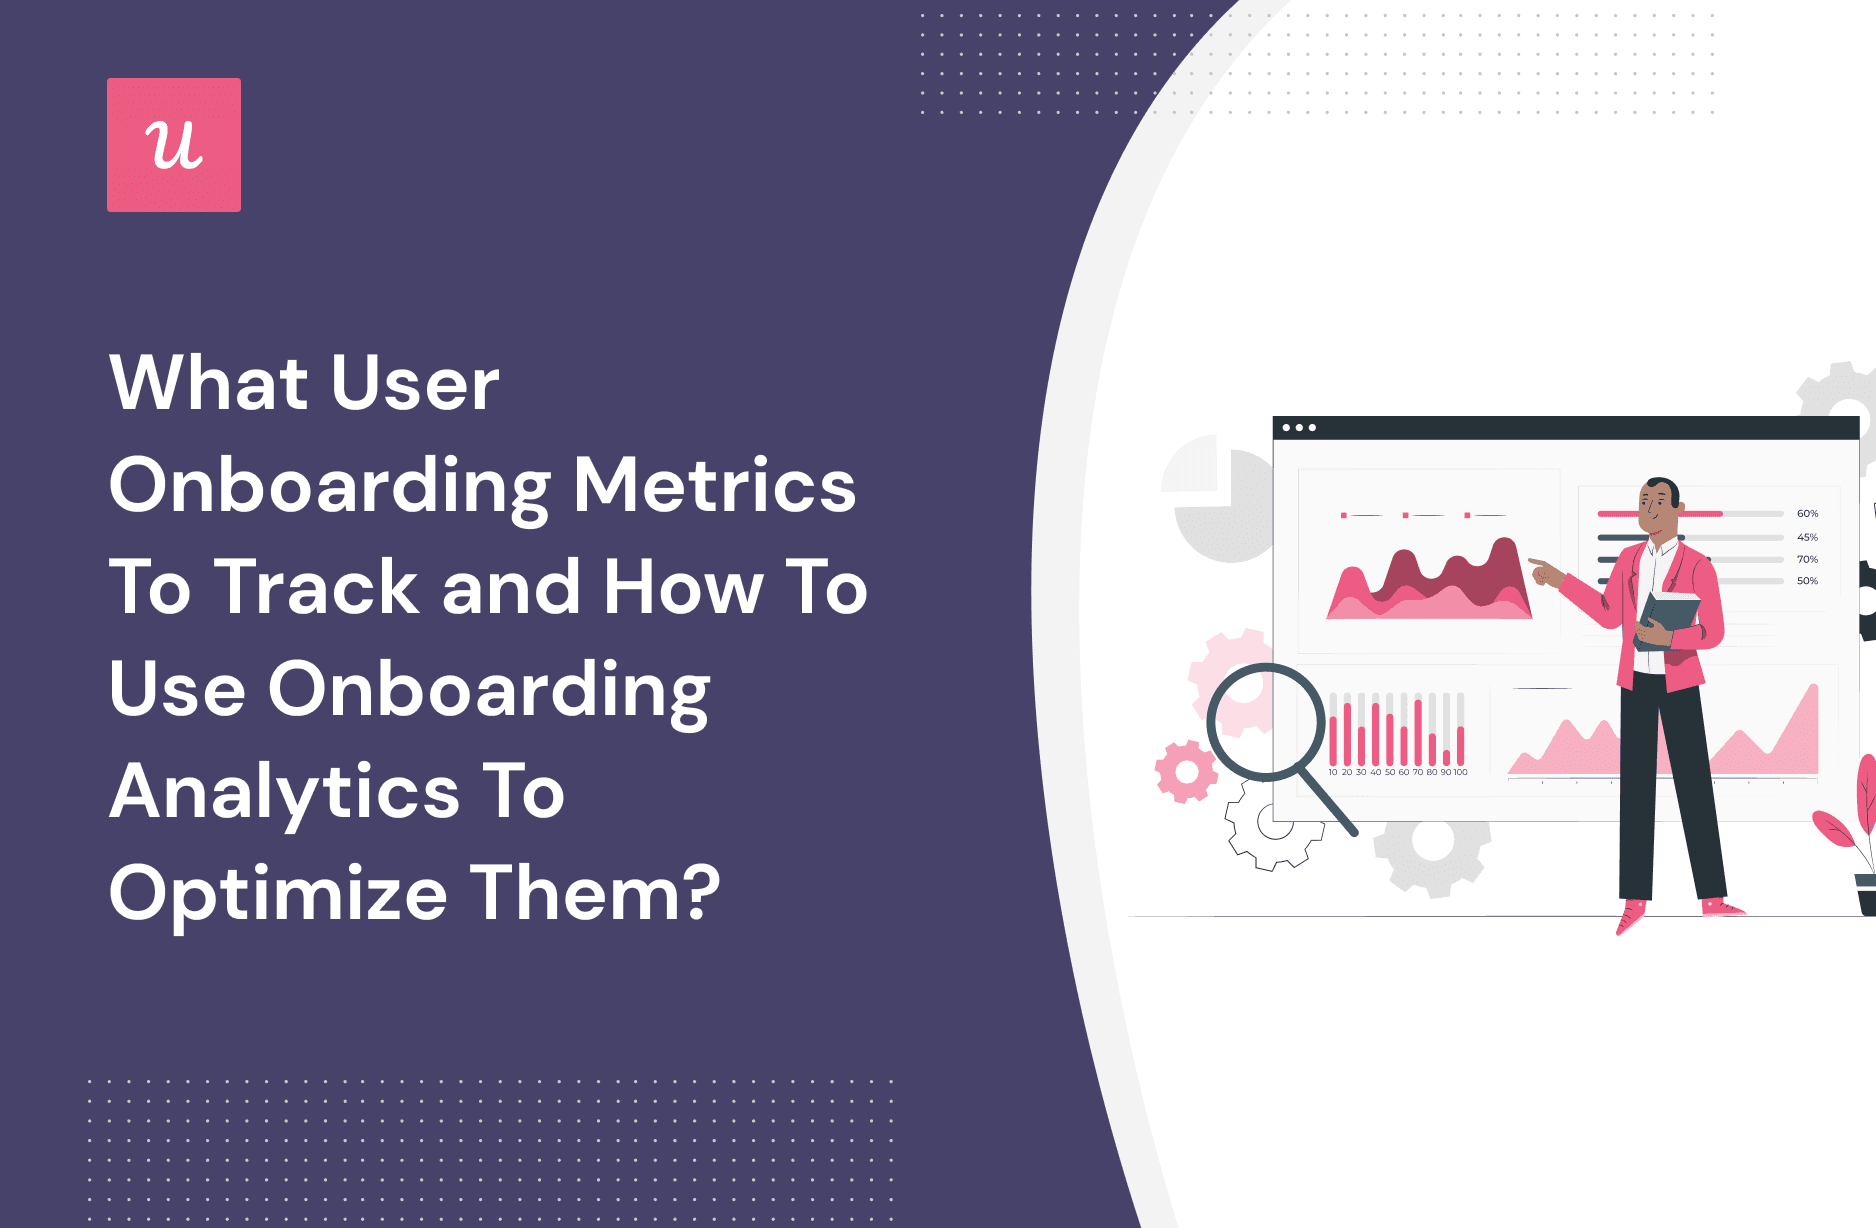 What User Onboarding Metrics To Track and How To Use Onboarding Analytics To Optimize Them? cover